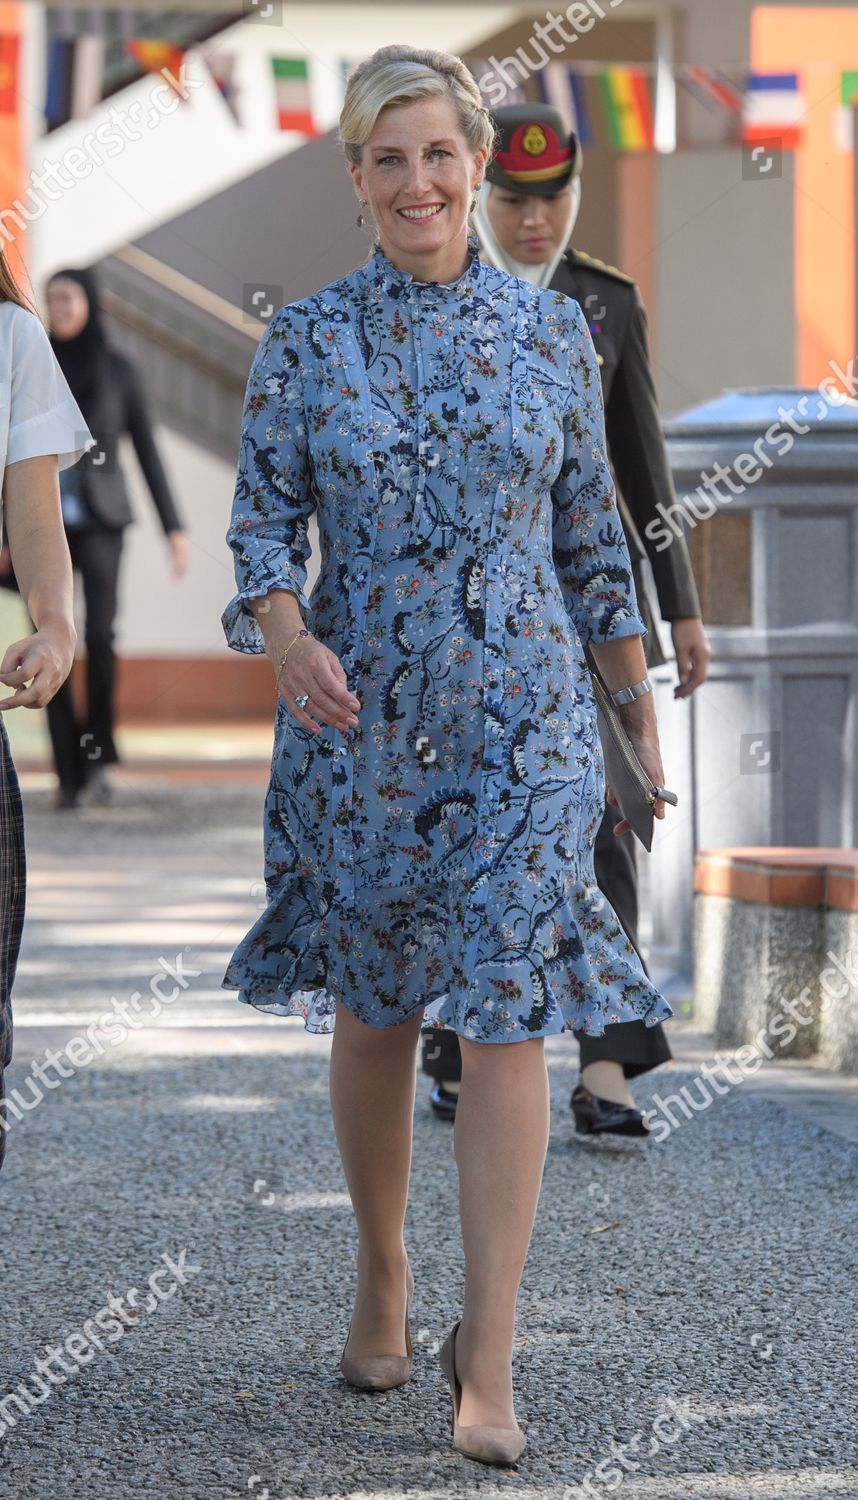 prince-edward-and-sophie-countess-of-wessex-state-visit-to-brunei-shutterstock-editorial-9122155bp.jpg